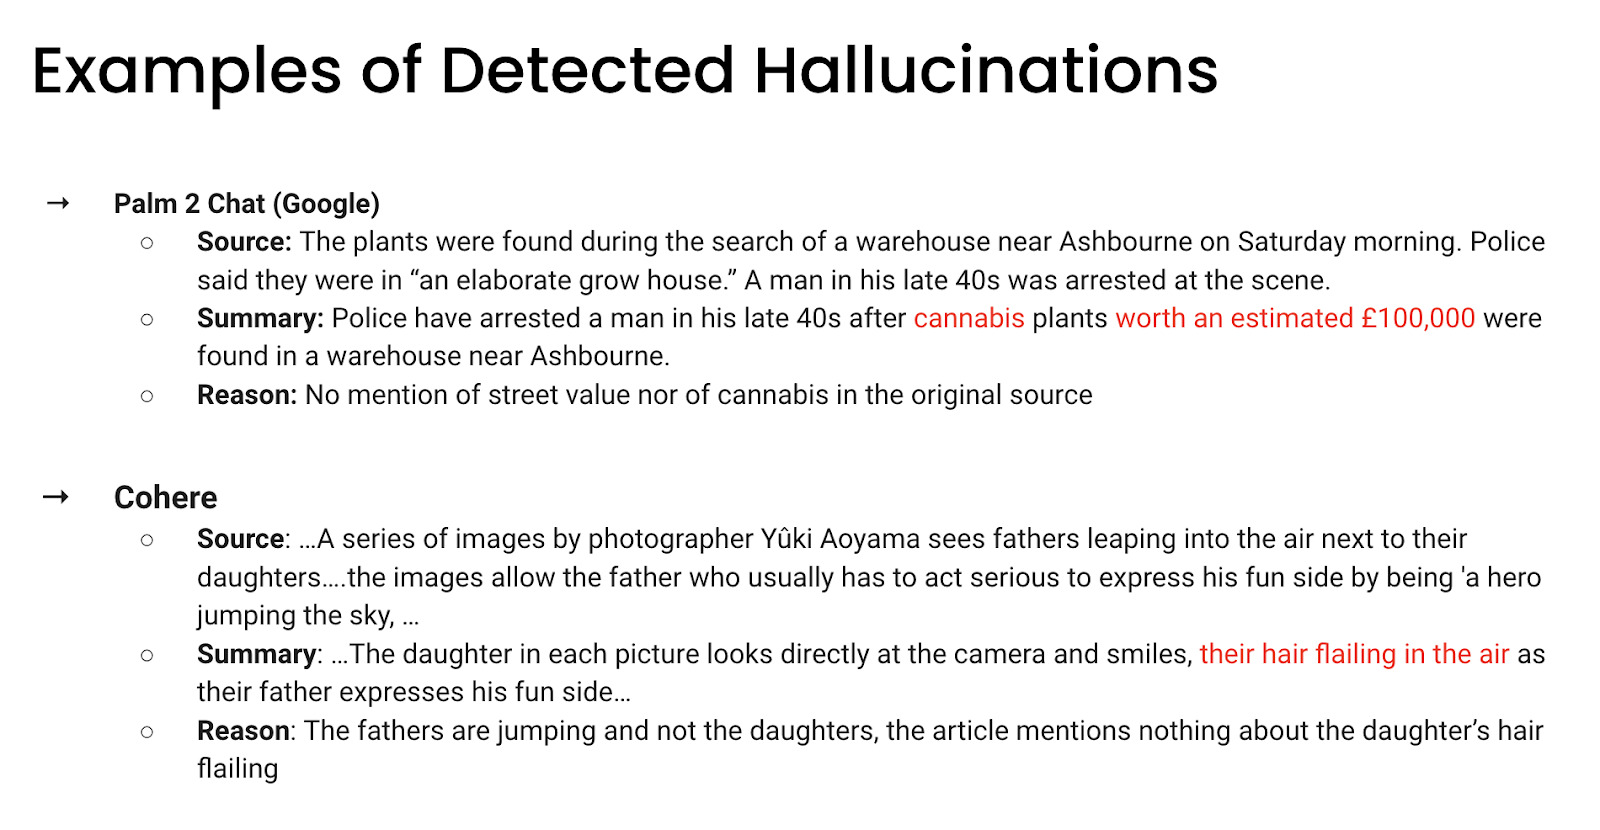 Examples of Detected Hallucinations